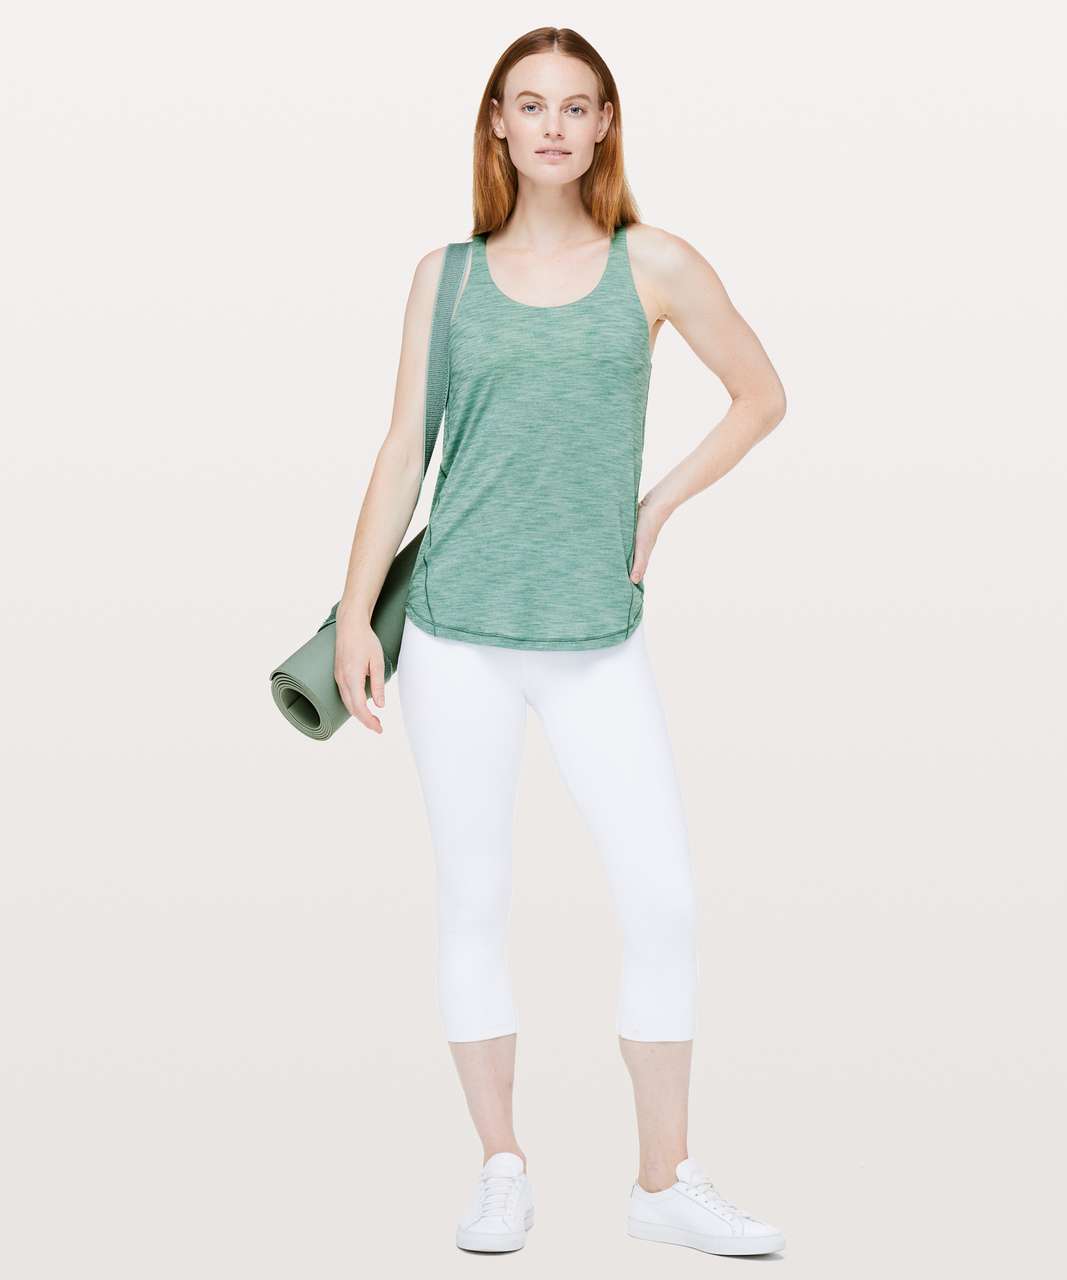 Lululemon Moment To Movement 2-In-1 Tank - Heathered Frosted Pine / Lemon Ice